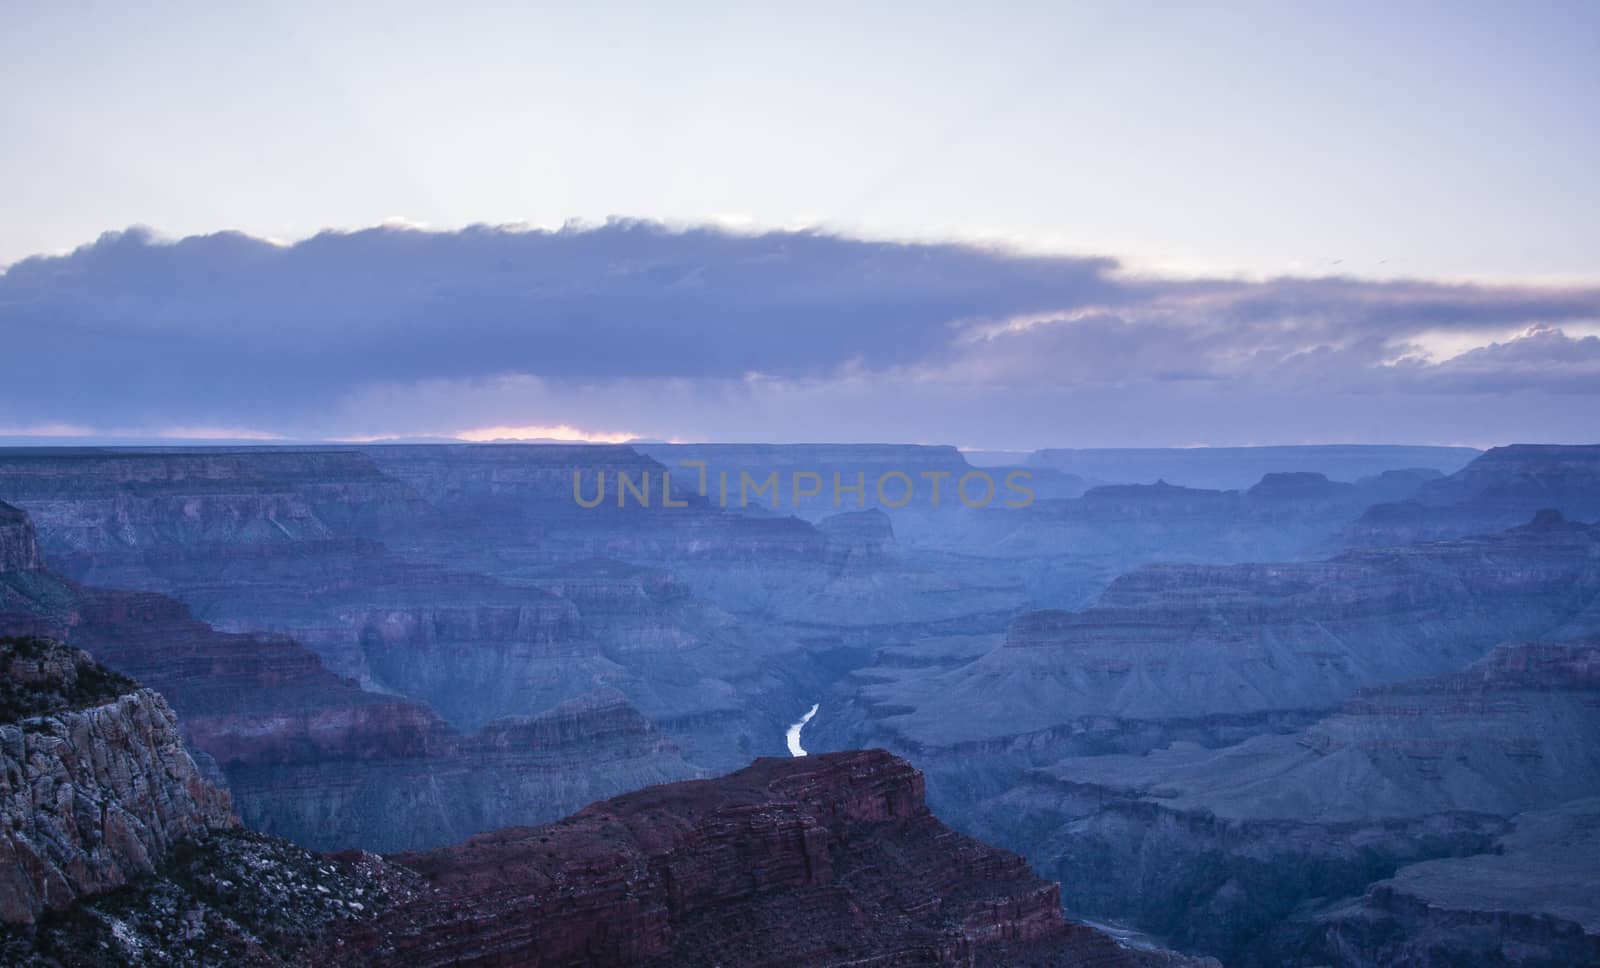 Beautiful Landscape of Grand Canyon and Colorado river at sunset by tanaonte